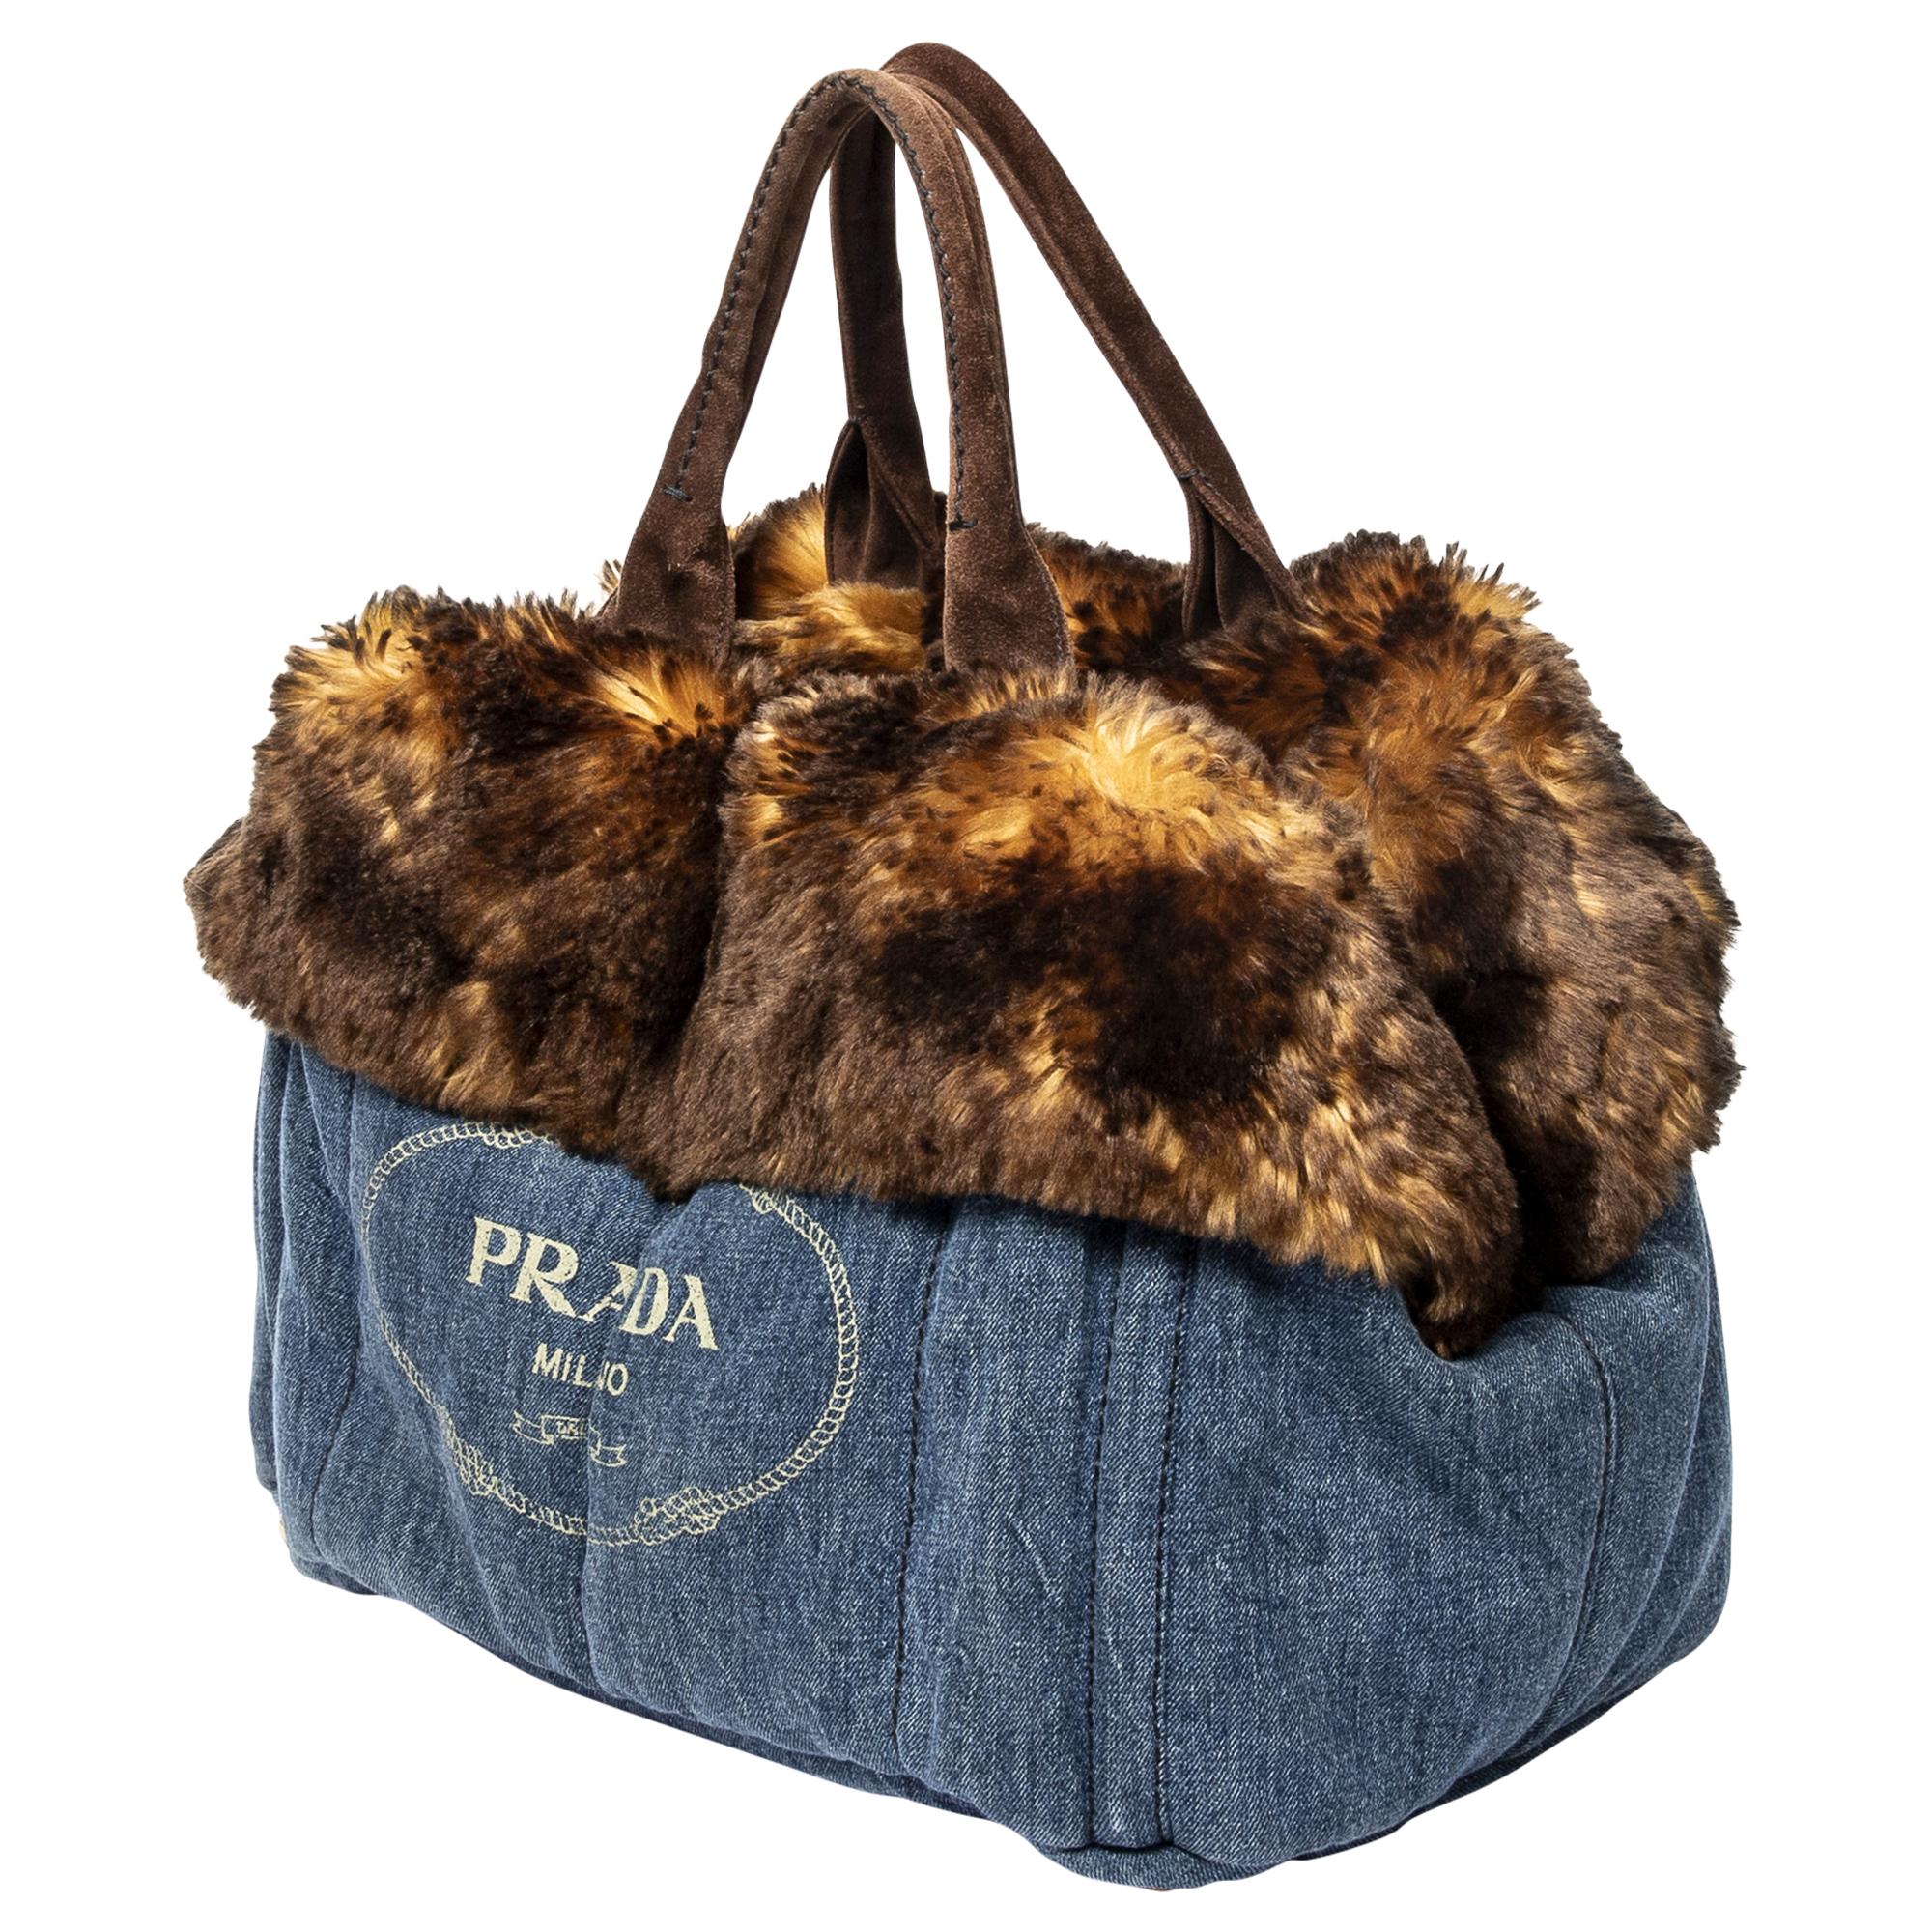 Make a statement with the Prada Limited Edition Large Denim Fur Canapa Tote. Crafted from durable denim in a deep dark blue hue, it's a versatile yet luxurious accessory. Adorned with gold-tone hardware and featuring an open-top design, its logo